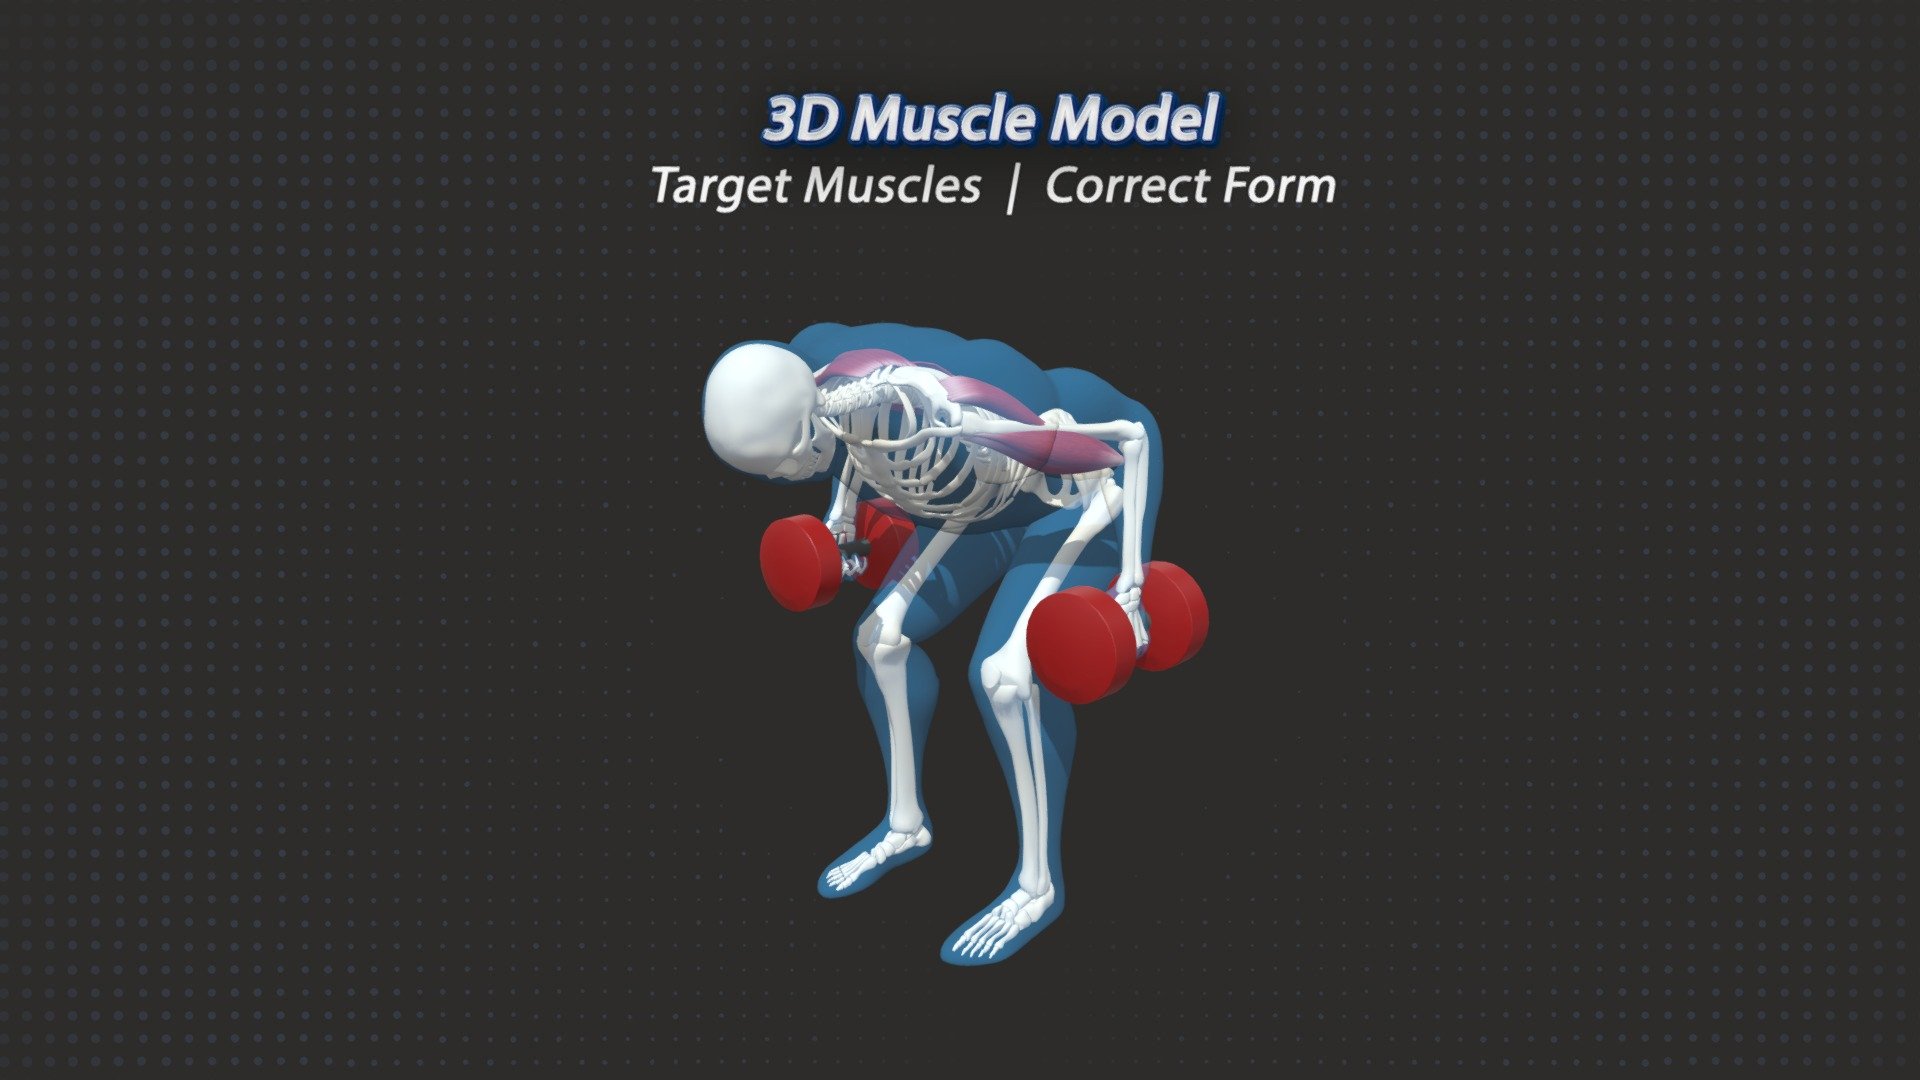 The Dumbbell Row Exercise targets the Lats, Traps, Rear Delts and the Bicep muscle Groups. 

Although I prefer the chest supported dumbbell row myself the free standing row is a nice variation to challange core stability, motor control and overall body awareness while you train. 

Created for 3DMuscleModel.com - 49. Dumbbell Rows - 3D model by 3D Muscle Model (@mikeshortall1991) 3d model